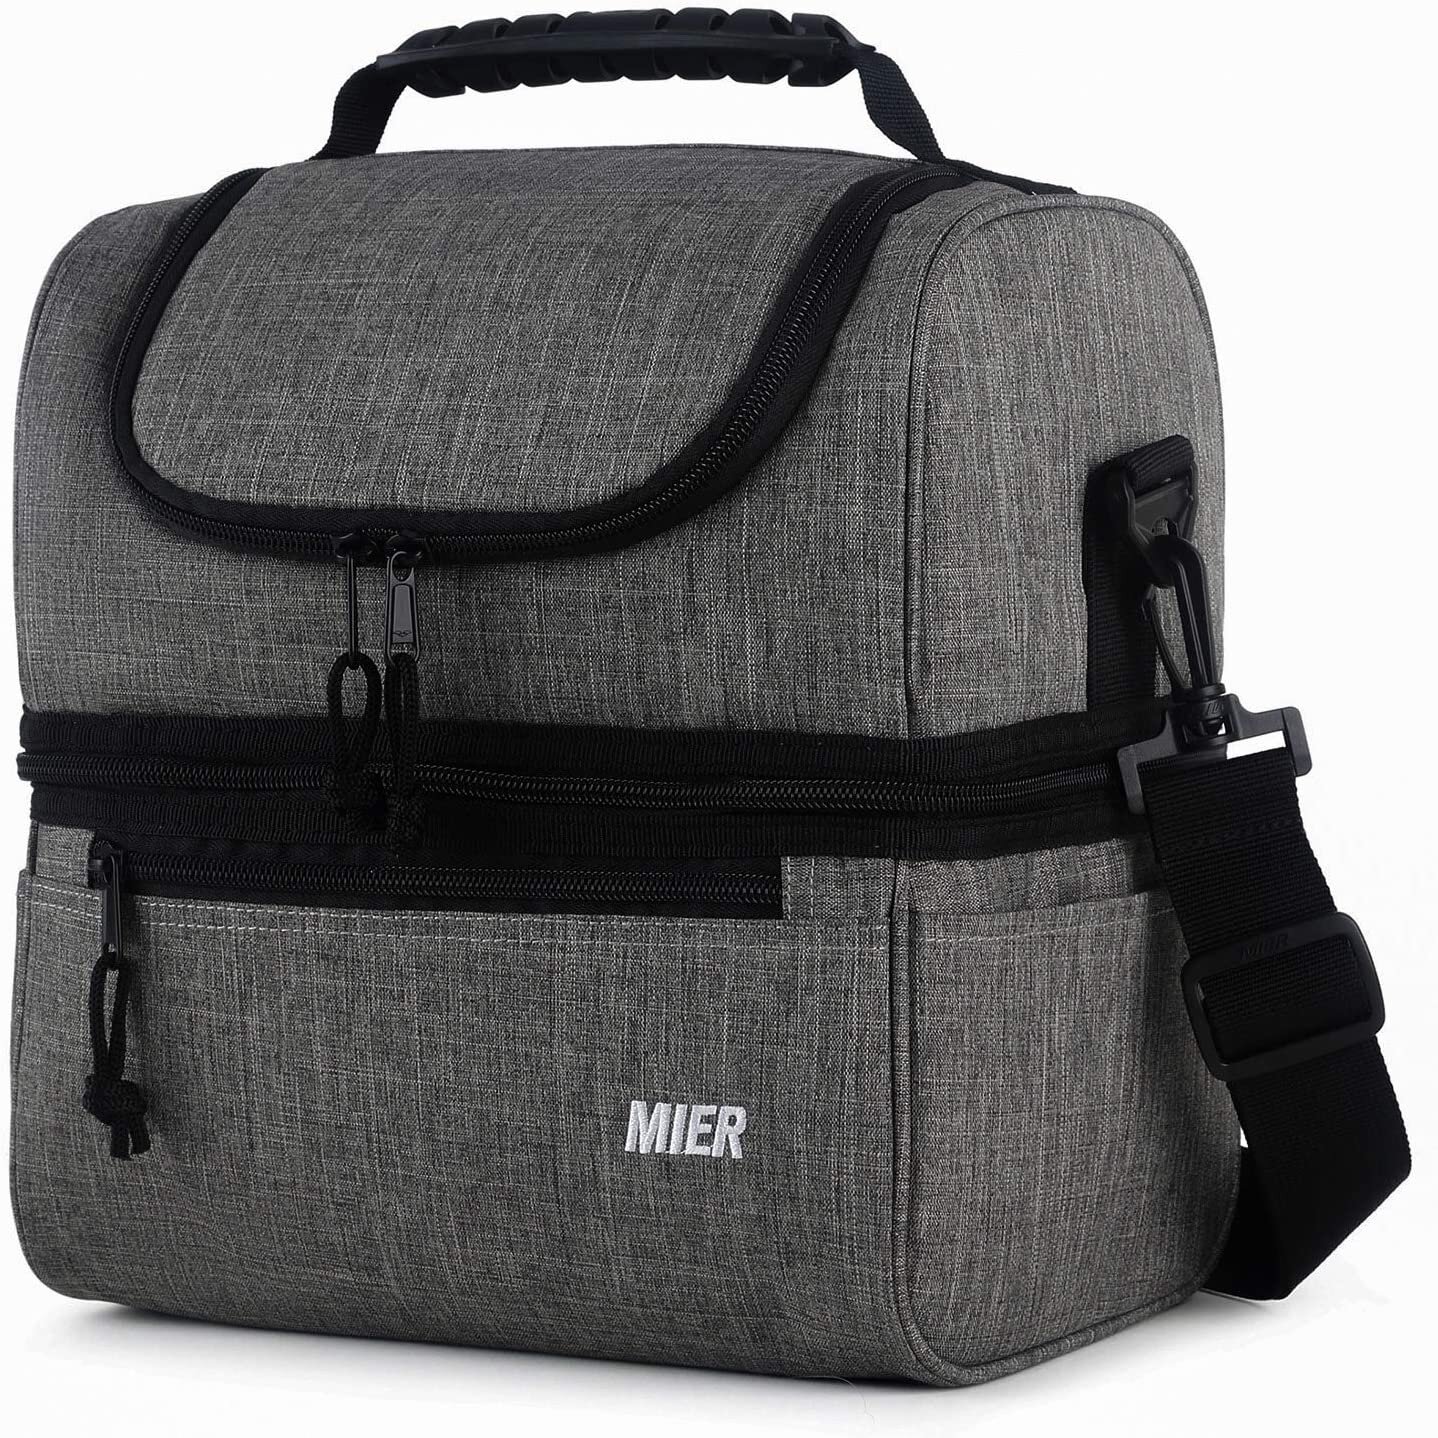 MIER Adult Lunch Box Insulated Lunch Bag Large Cooler Tote Bag for Men Women,